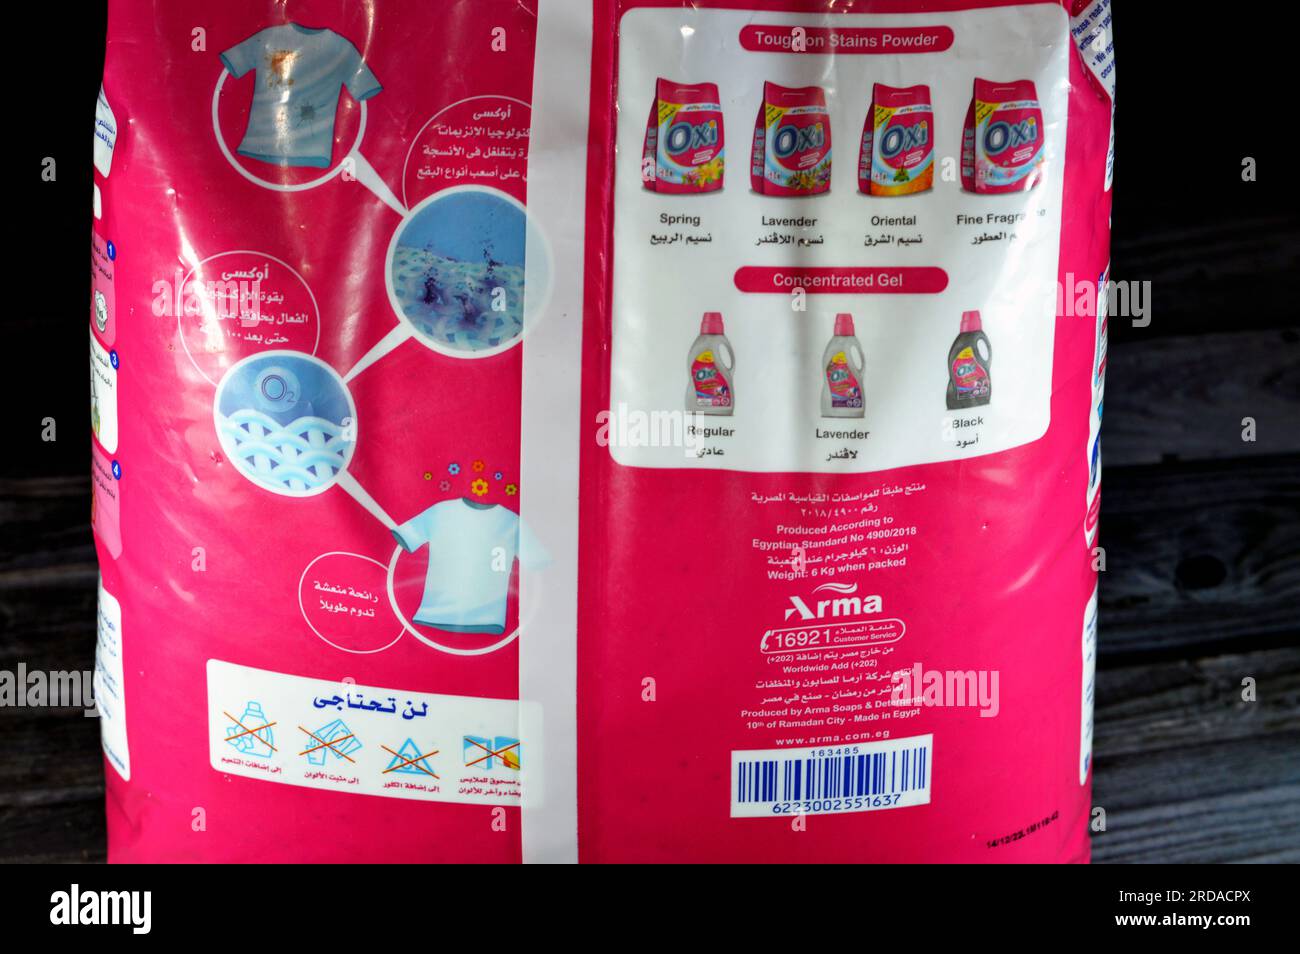 Cairo, Egypt, June 21 2023:  Oxi Automatic Powder Detergent - Lavender Scent concentrated for automatic washing machines with effective oxygen power f Stock Photo